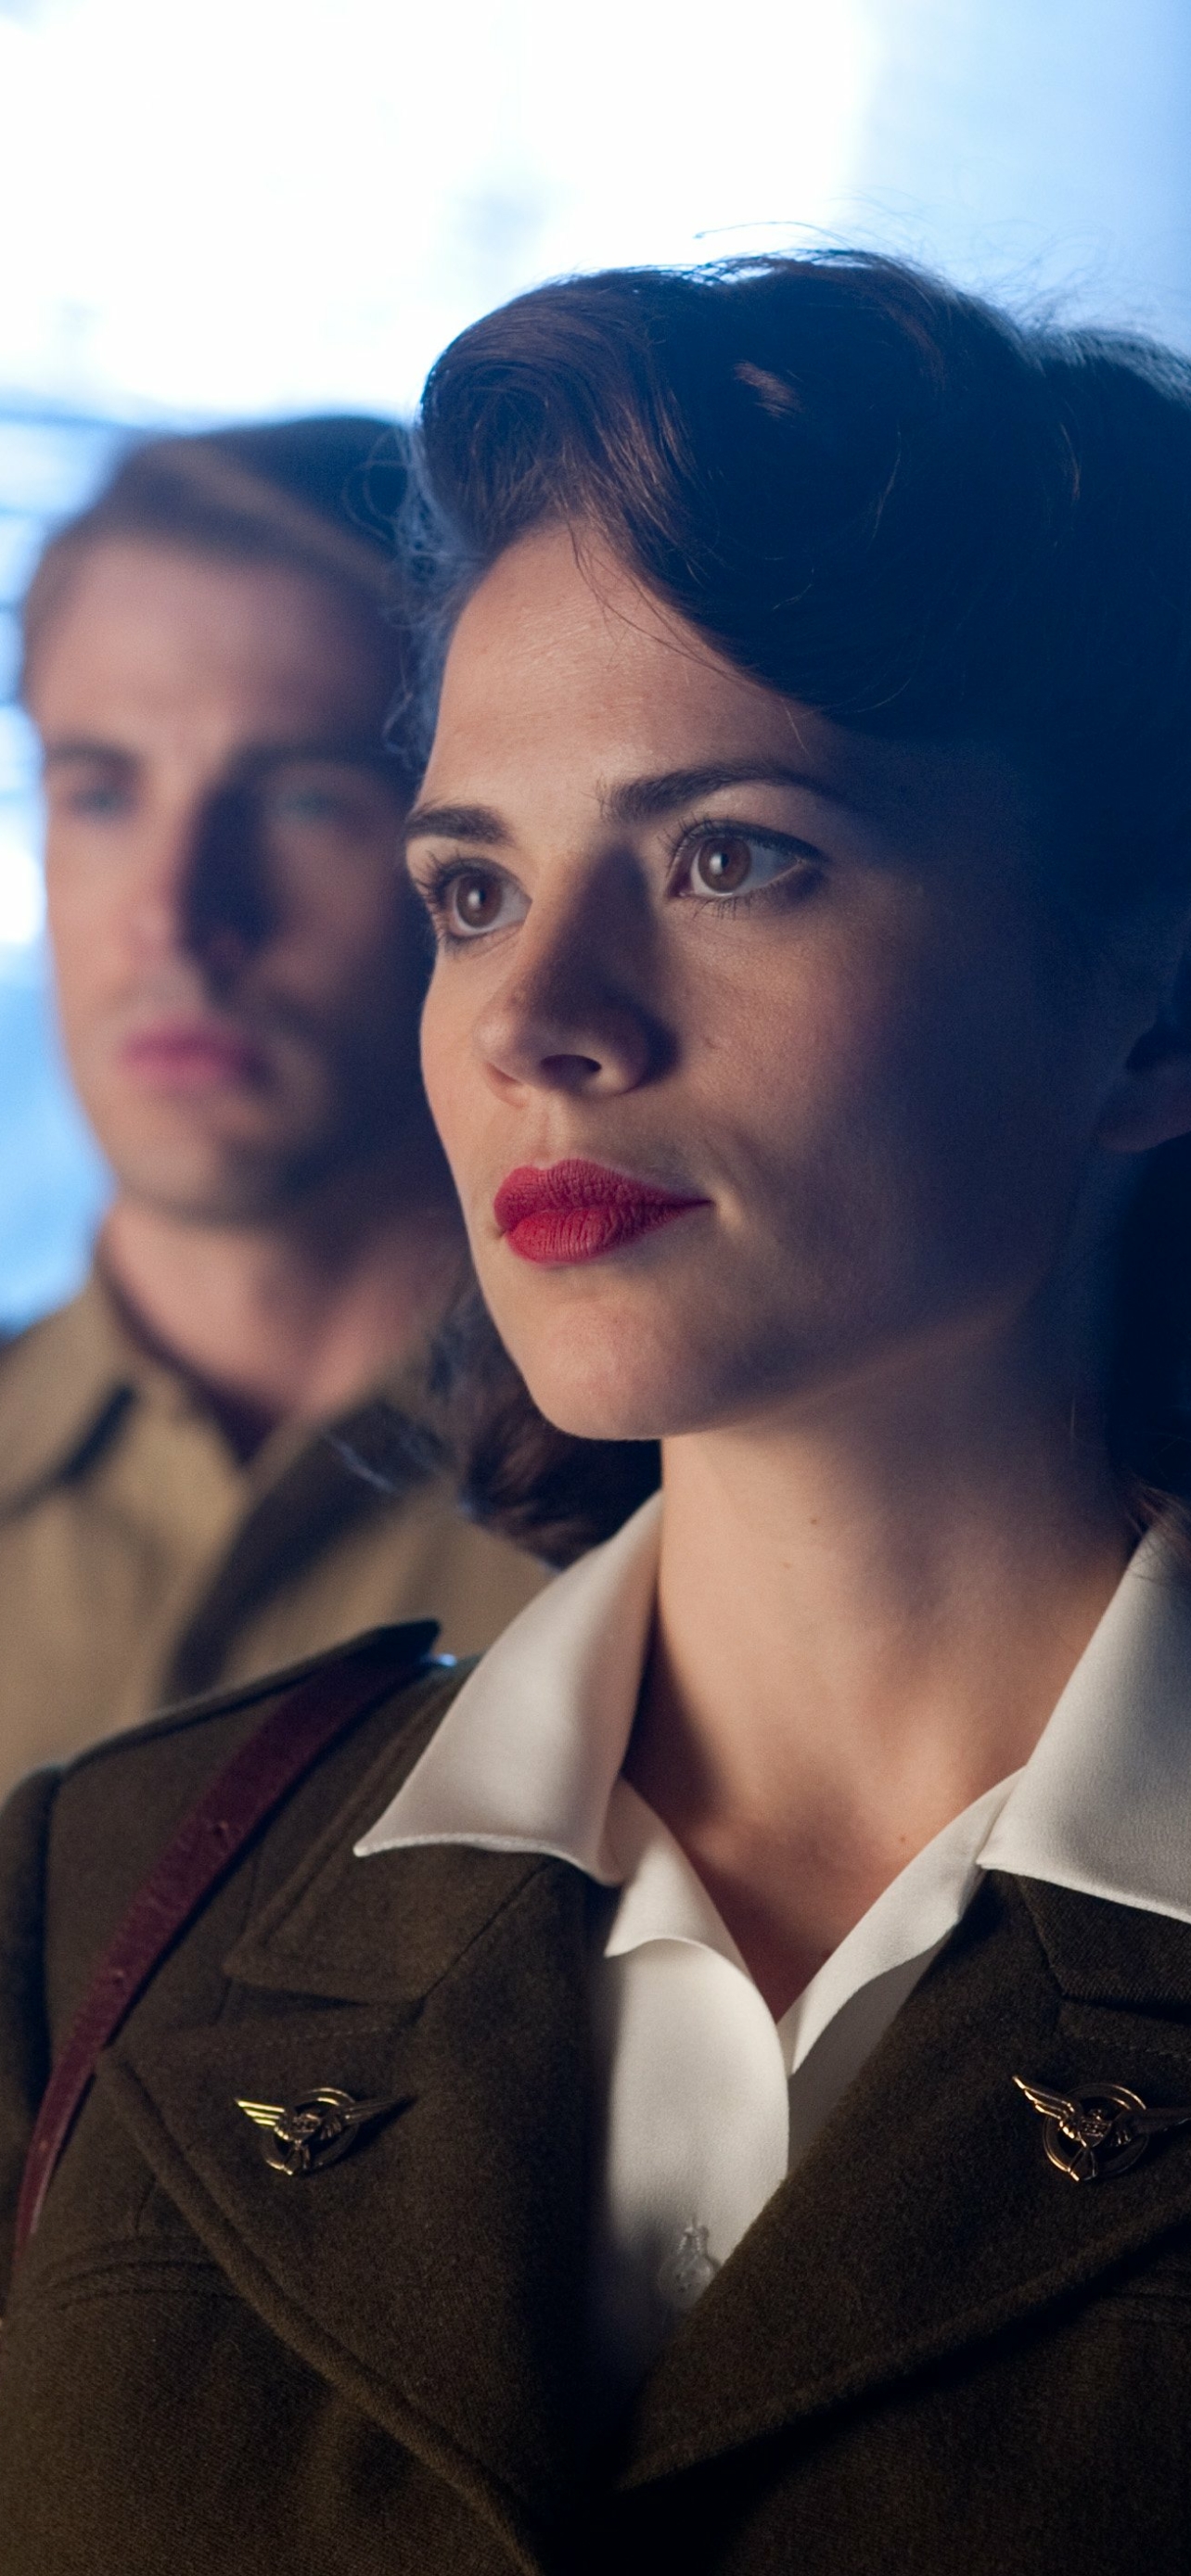 peggy carter, movie, captain america: the first avenger, hayley atwell, chris evans, captain america, steve rogers